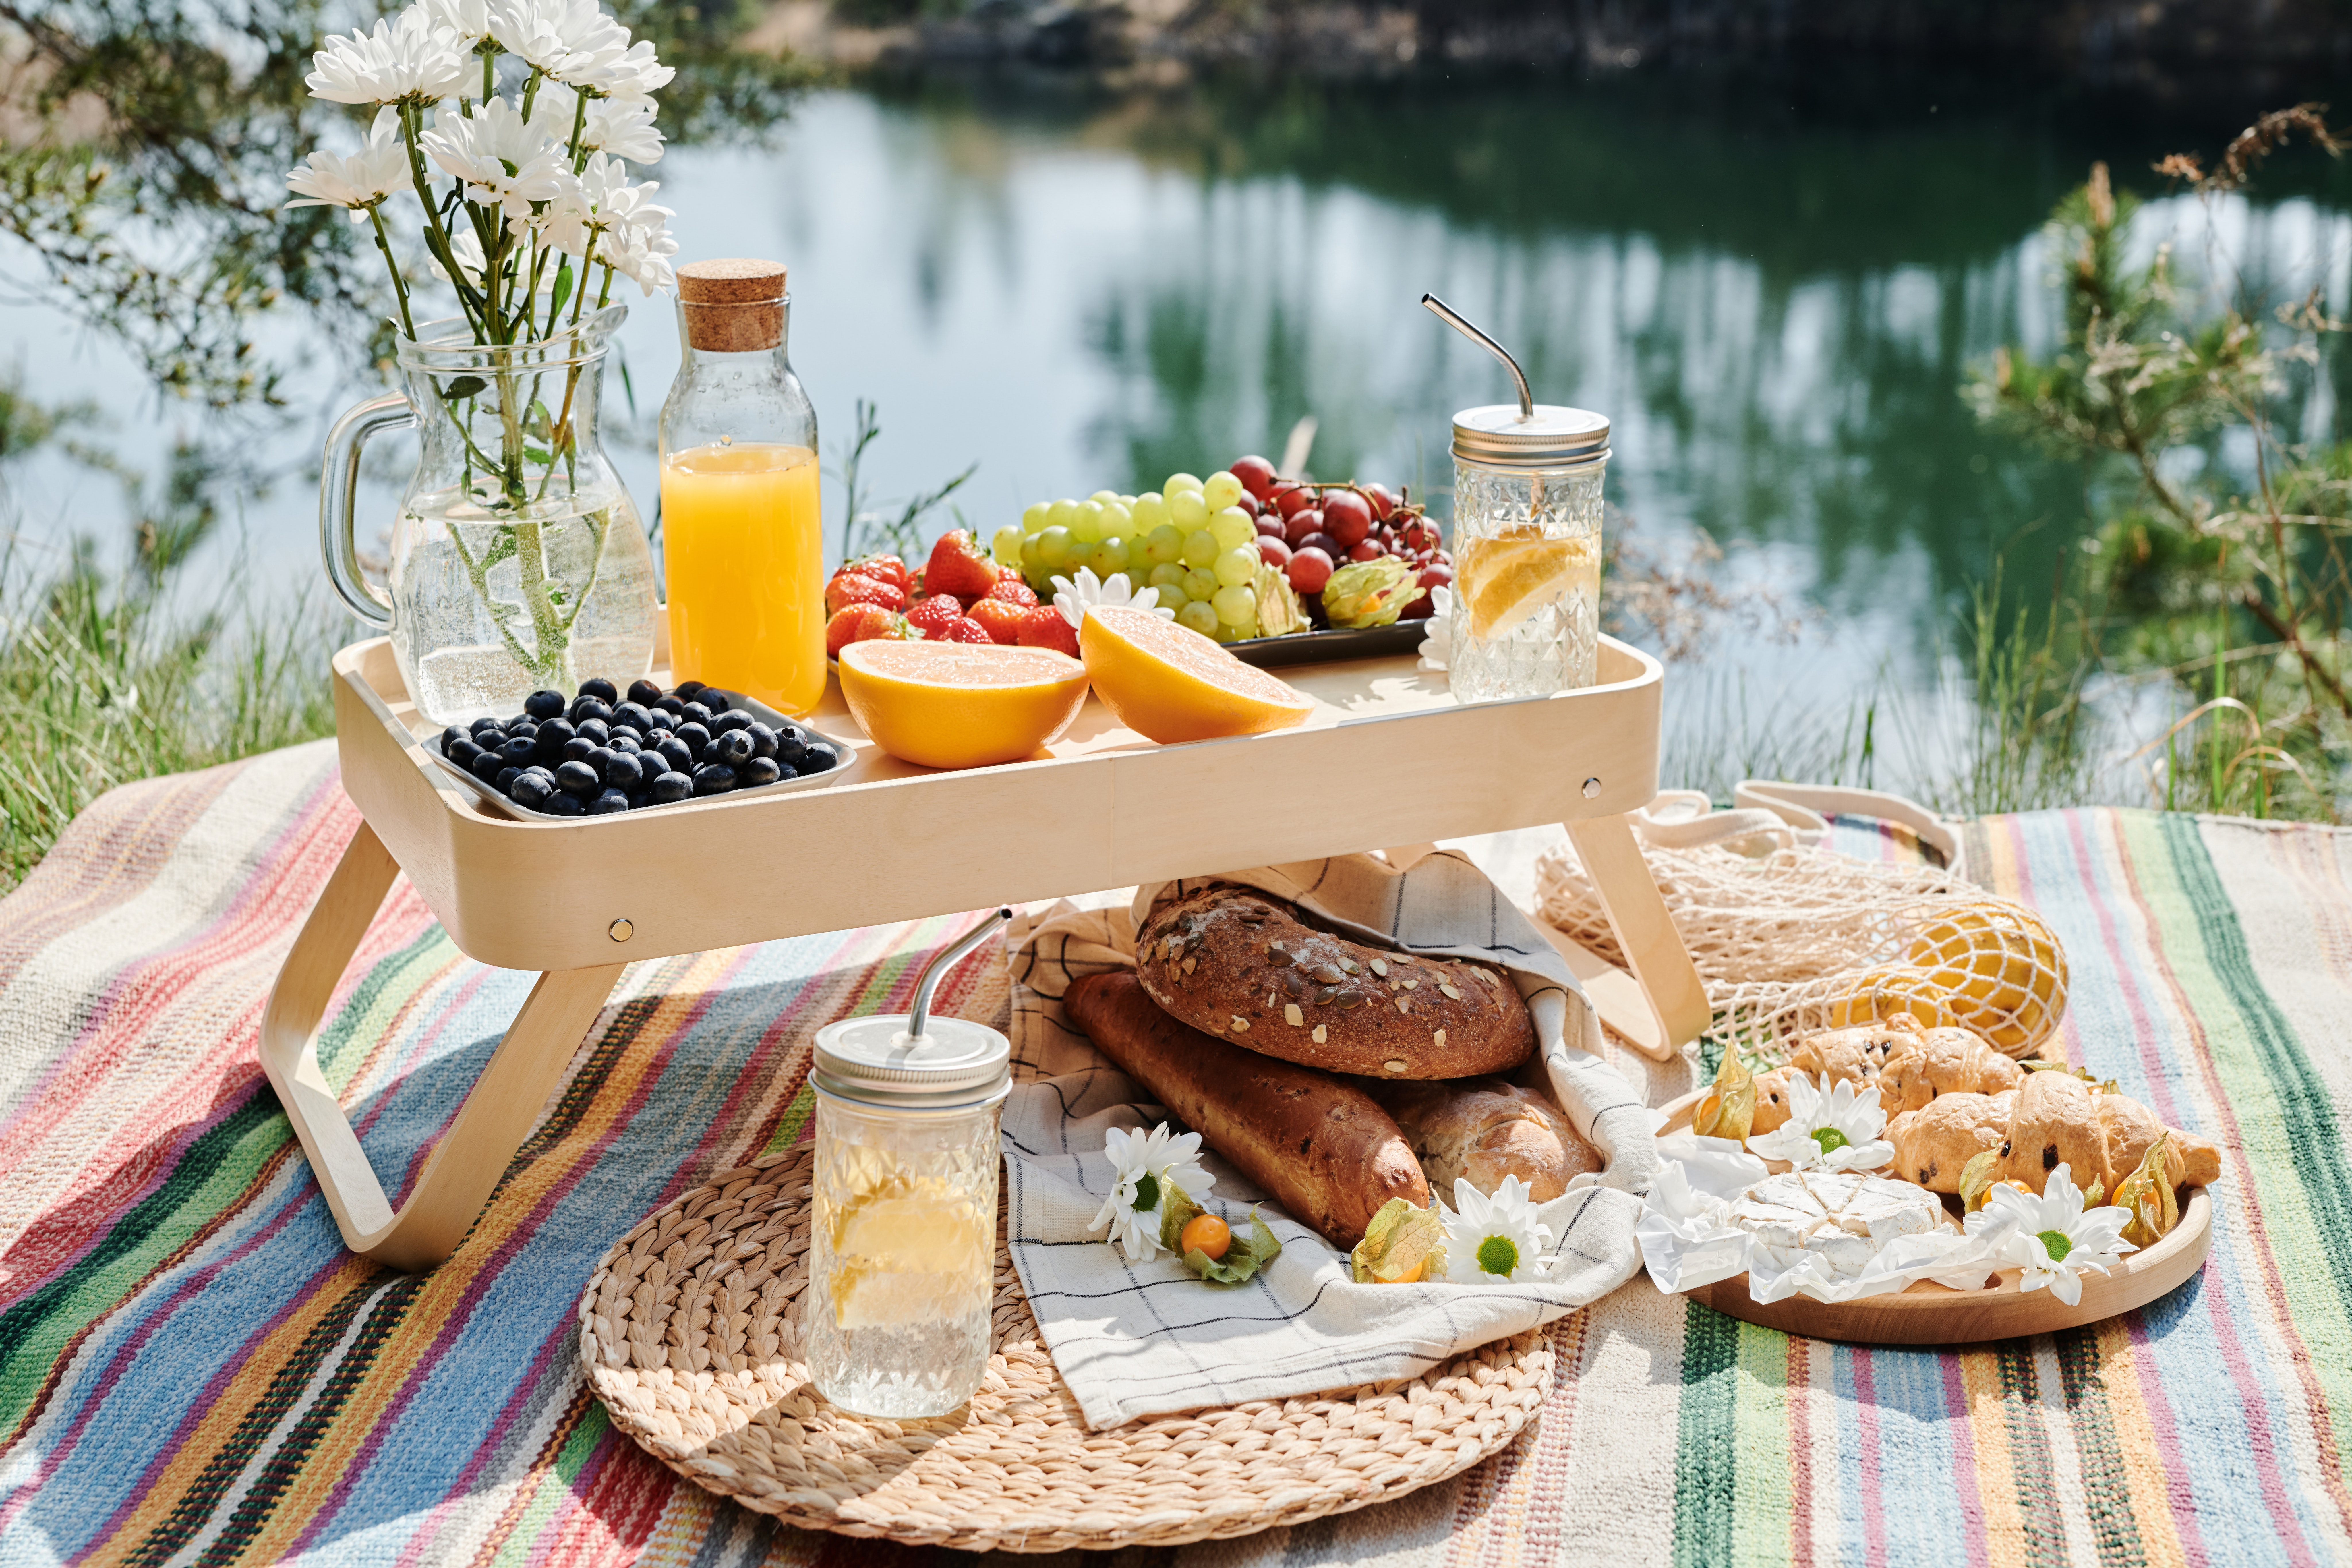 picnic food and drinks on a blanket and a tray